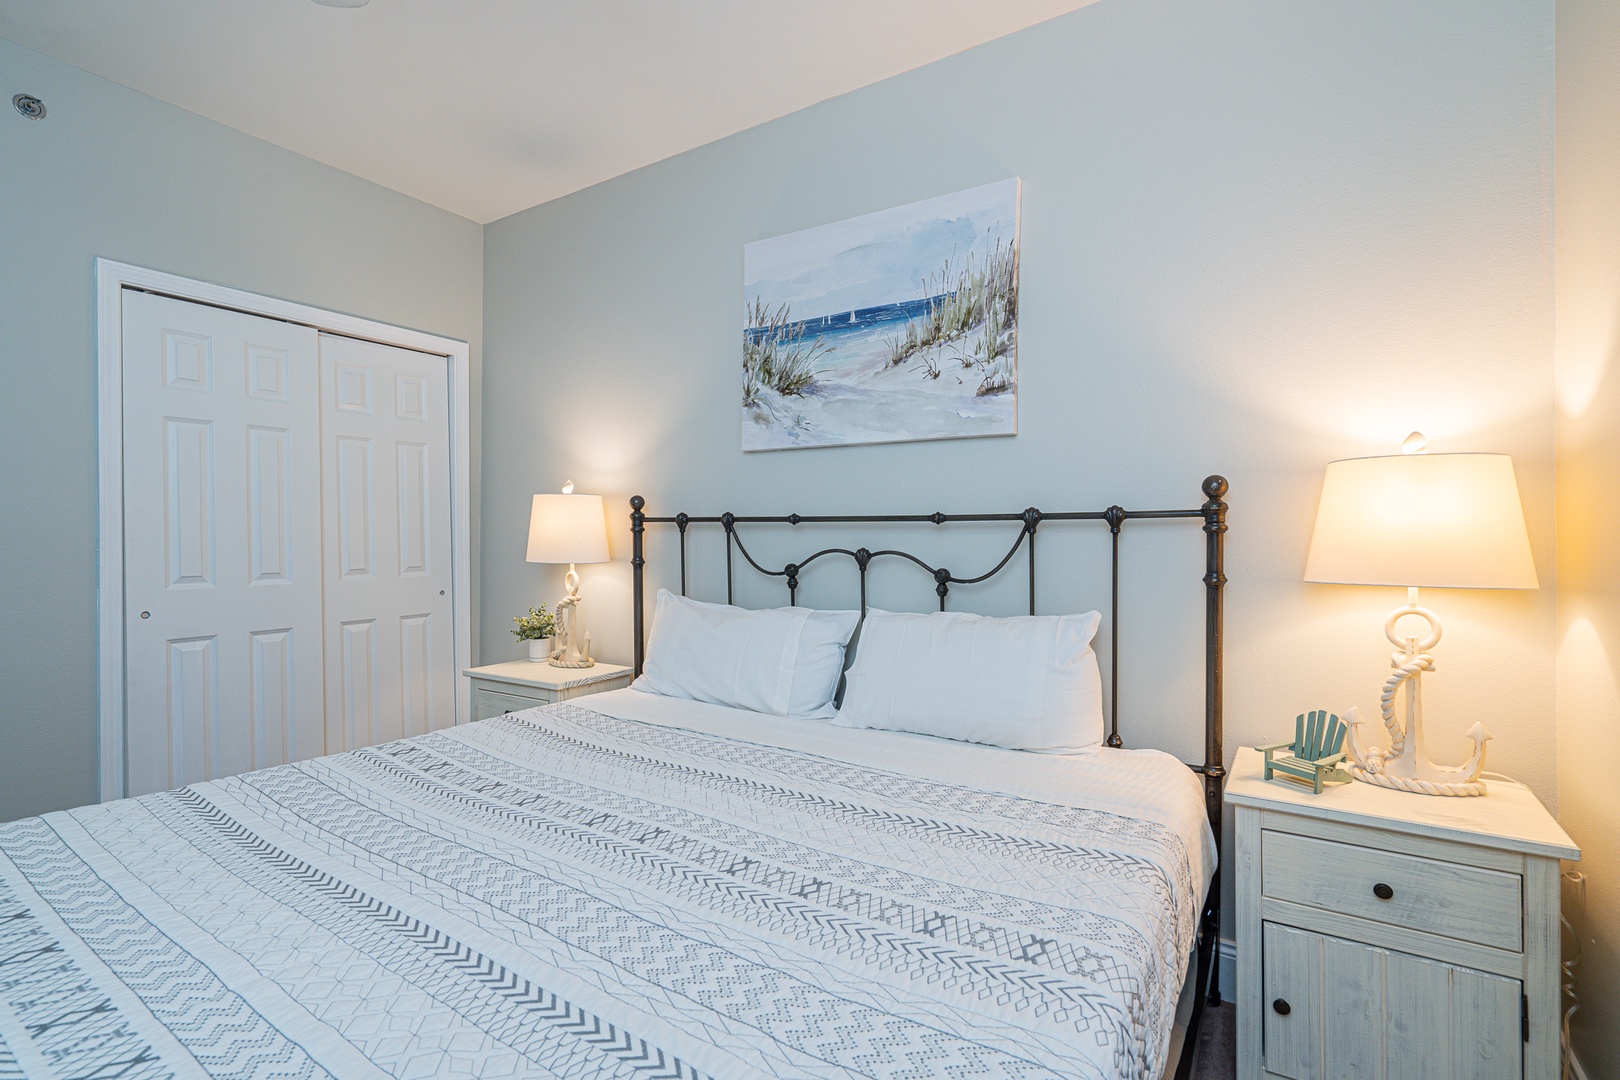 The final private bedroom showcases a king-sized bed & Smart TV